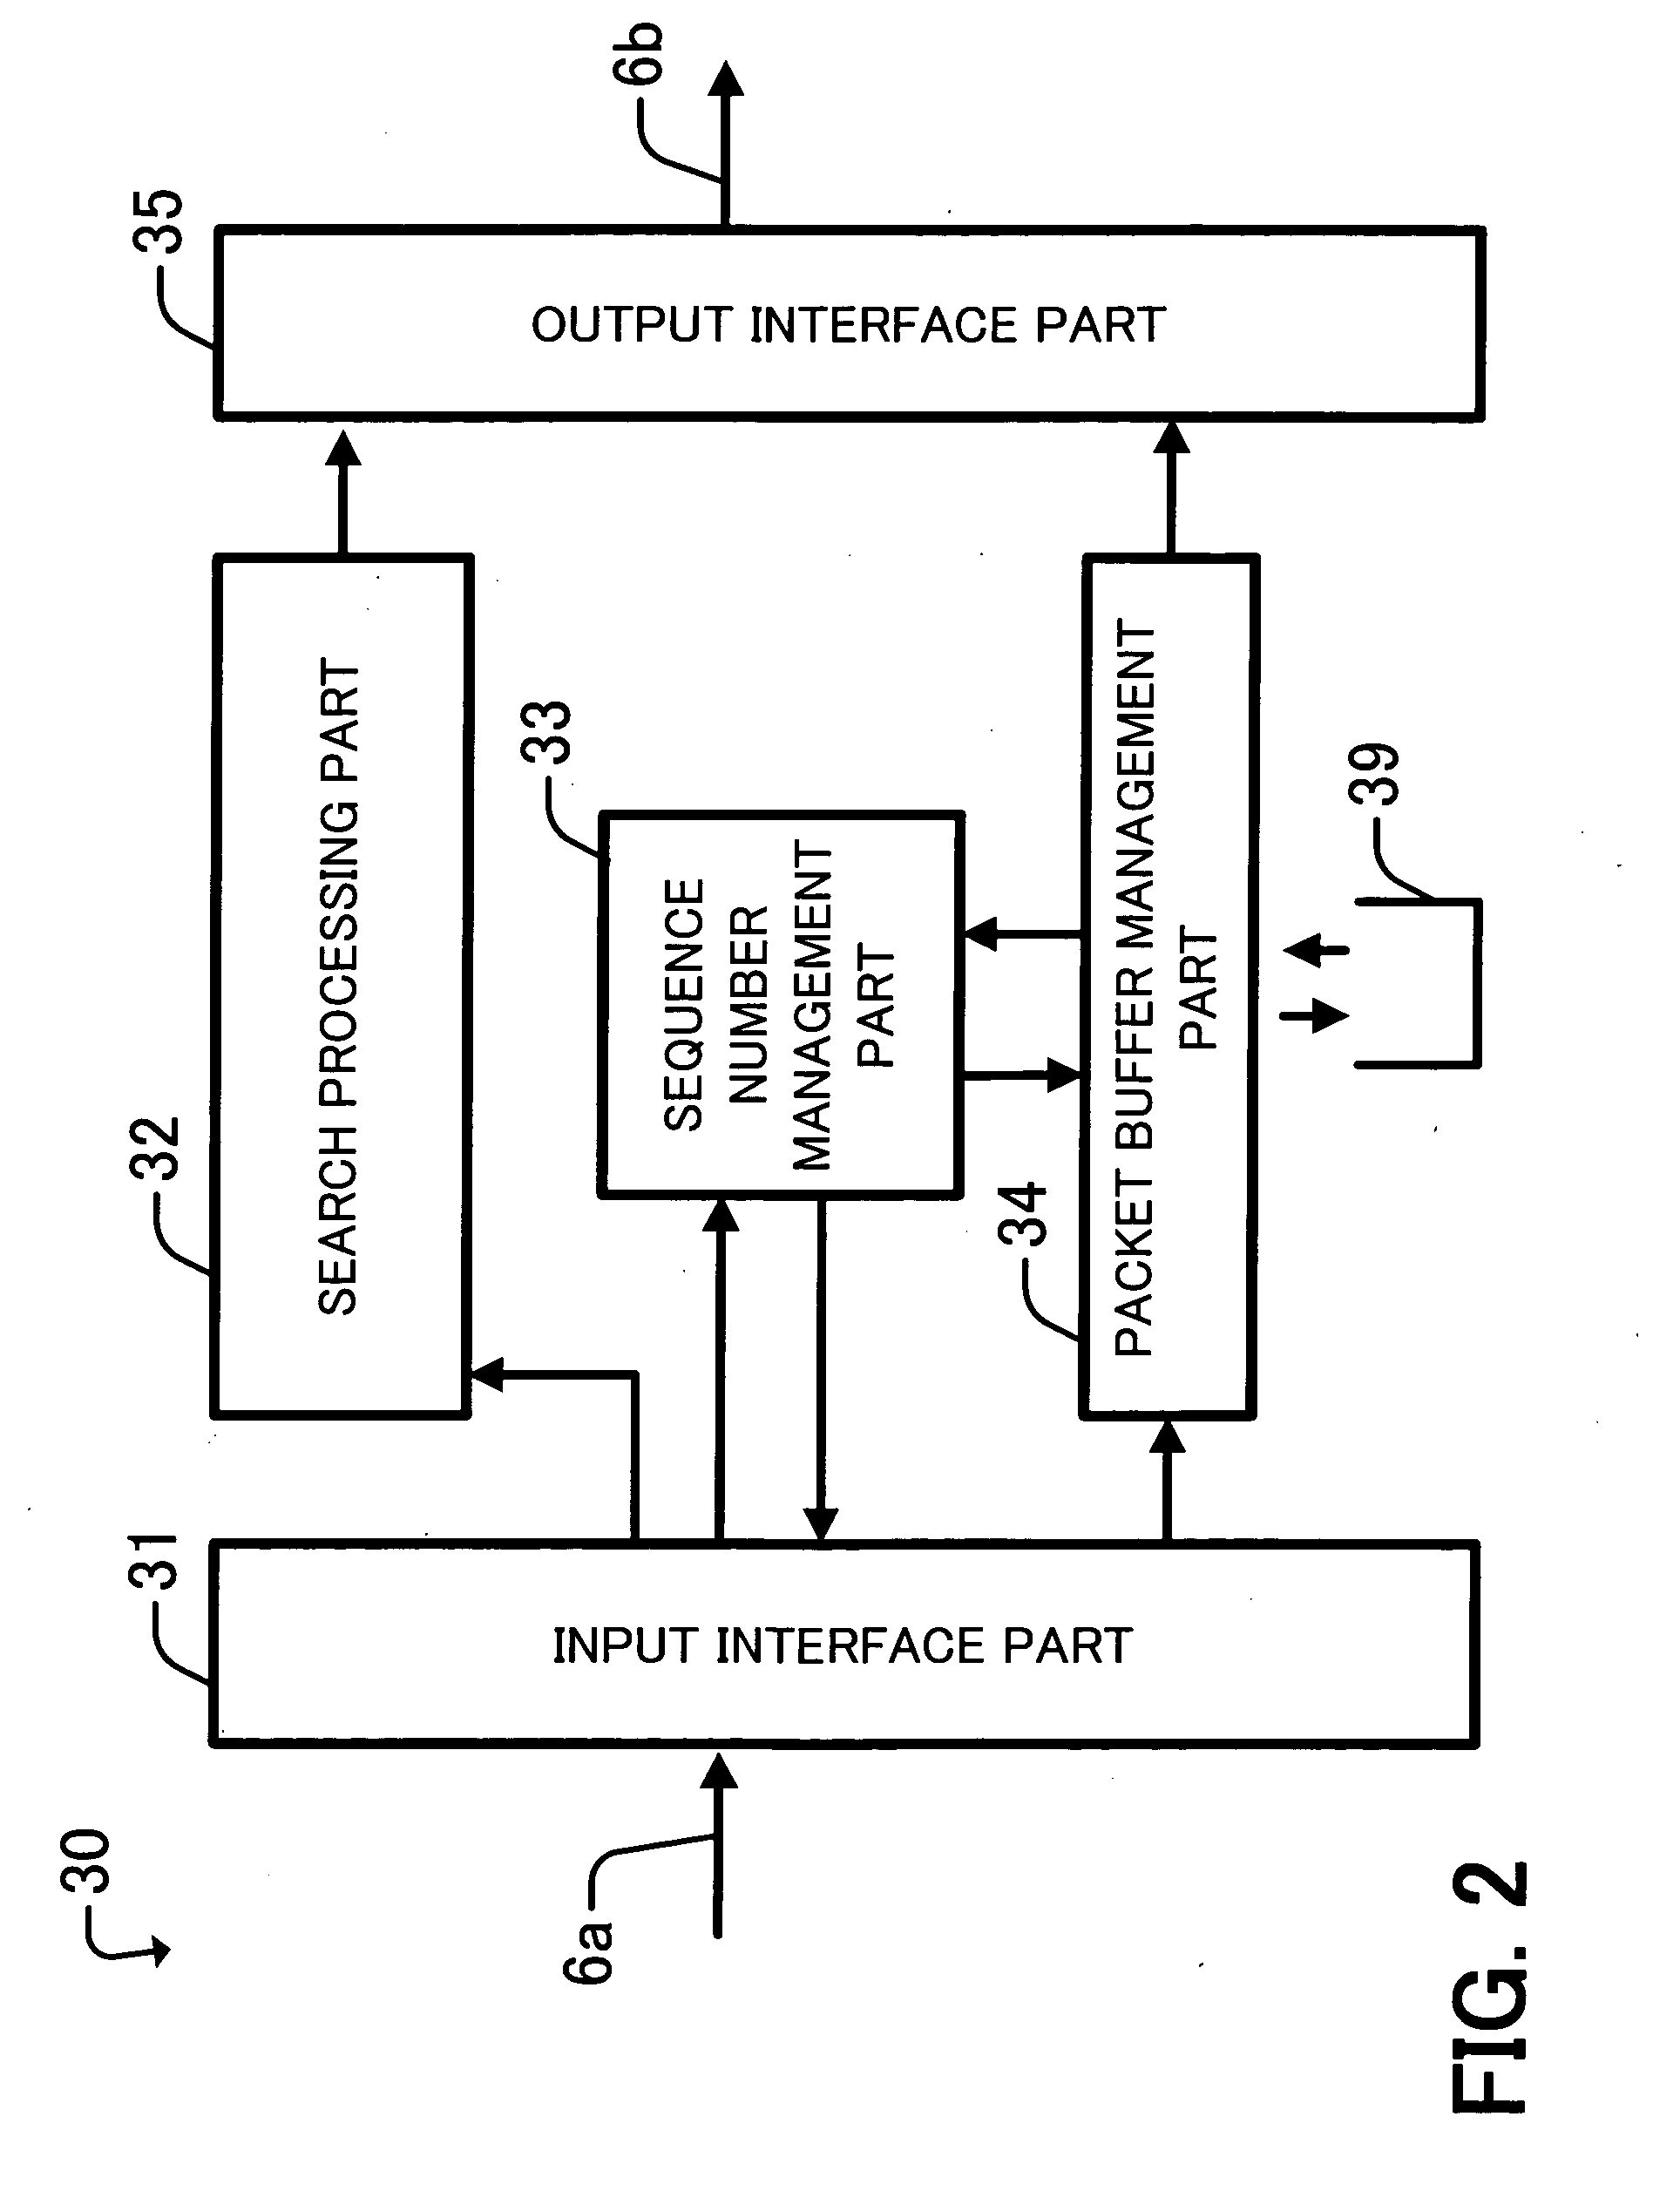 Packet processing apparatus and method